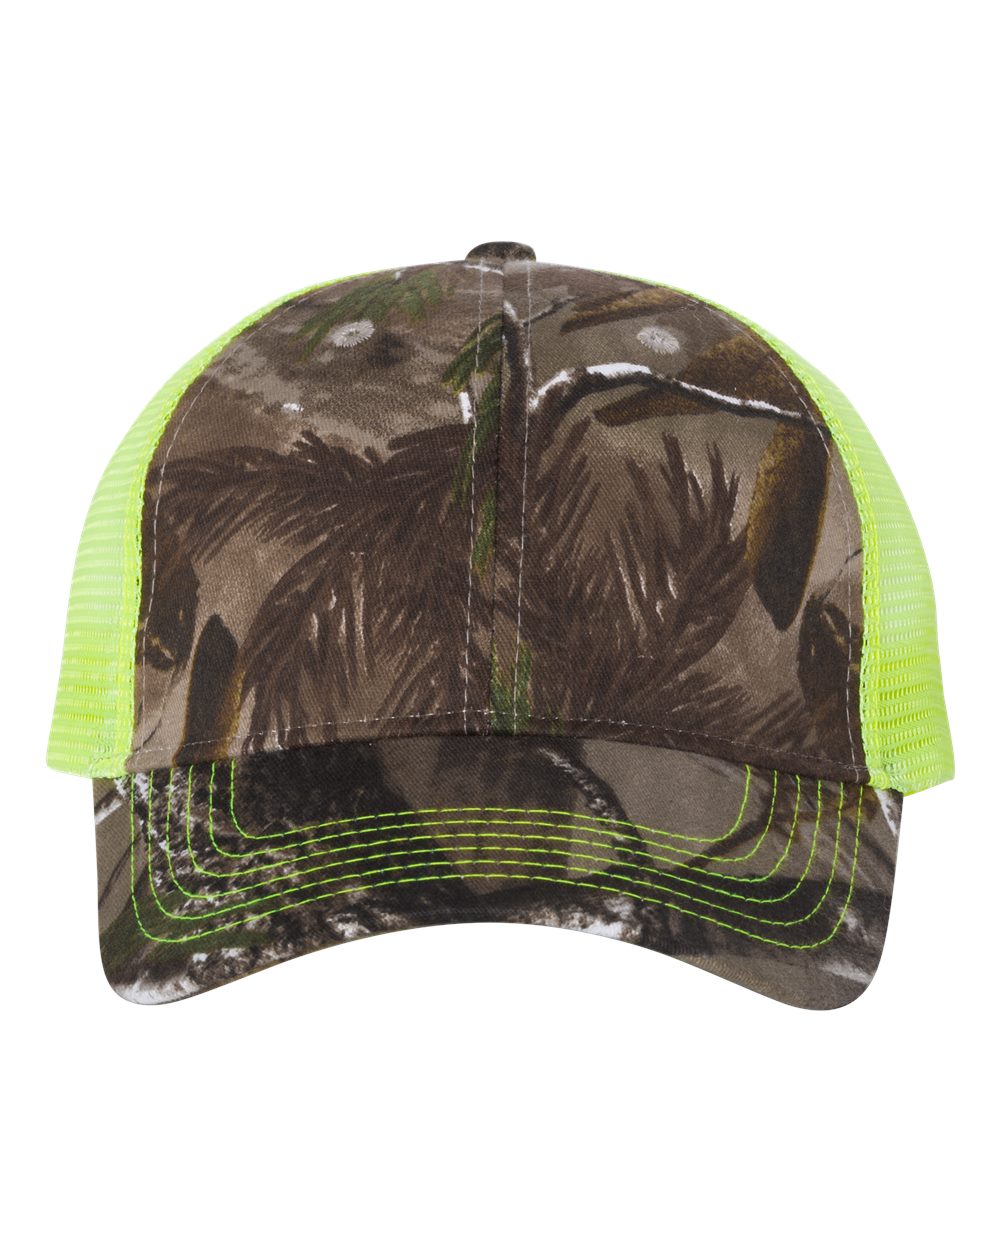 click to view Realtree AP/ Neon Yellow